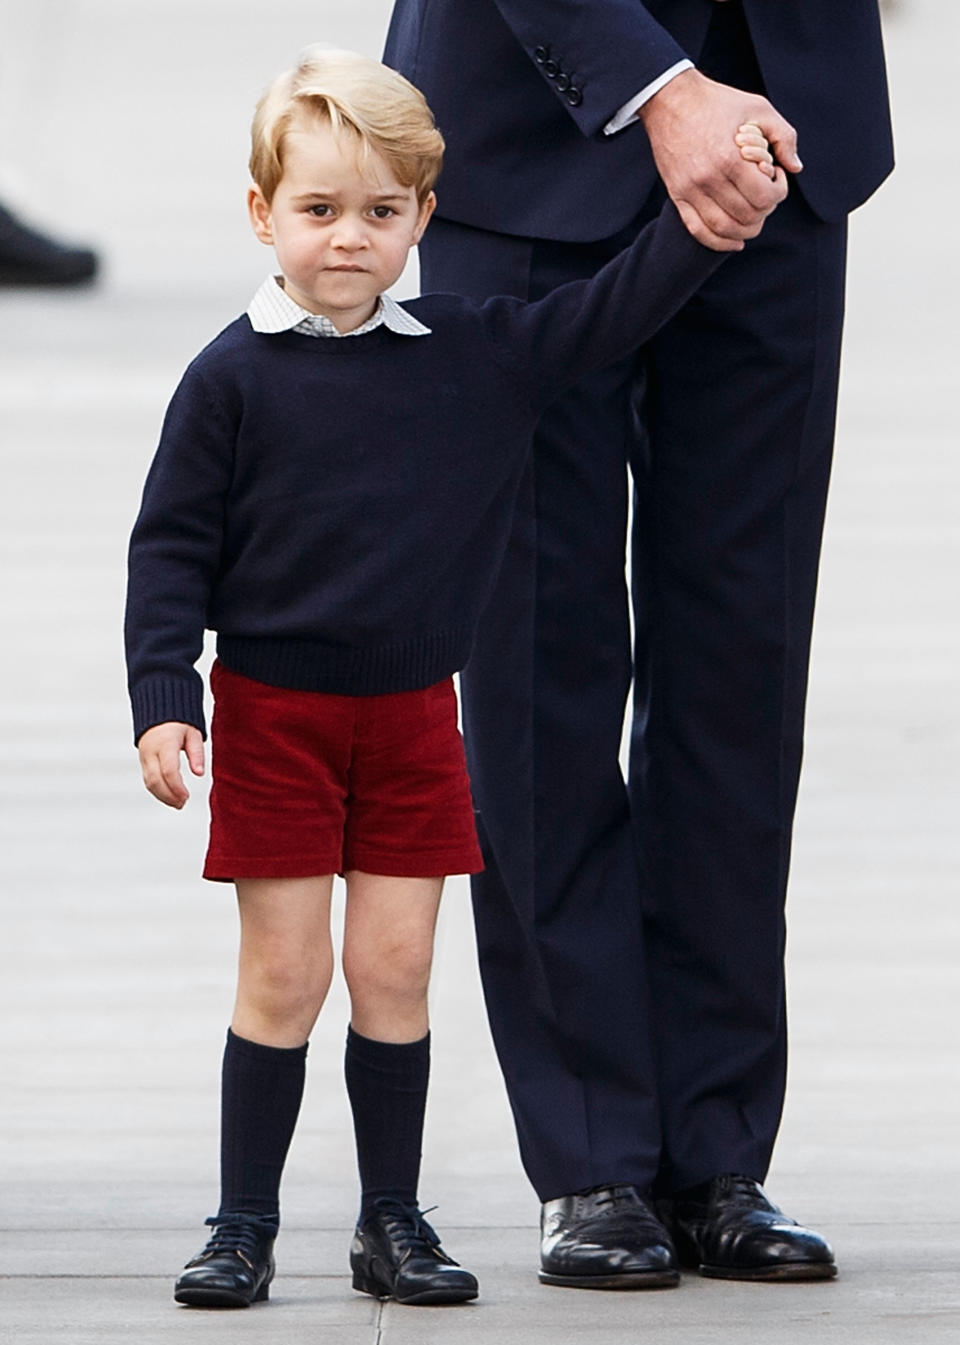 He’s been wearing them since he was young, and experts say it’ll be years to go yet before George covers up his knees. Photo: Getty